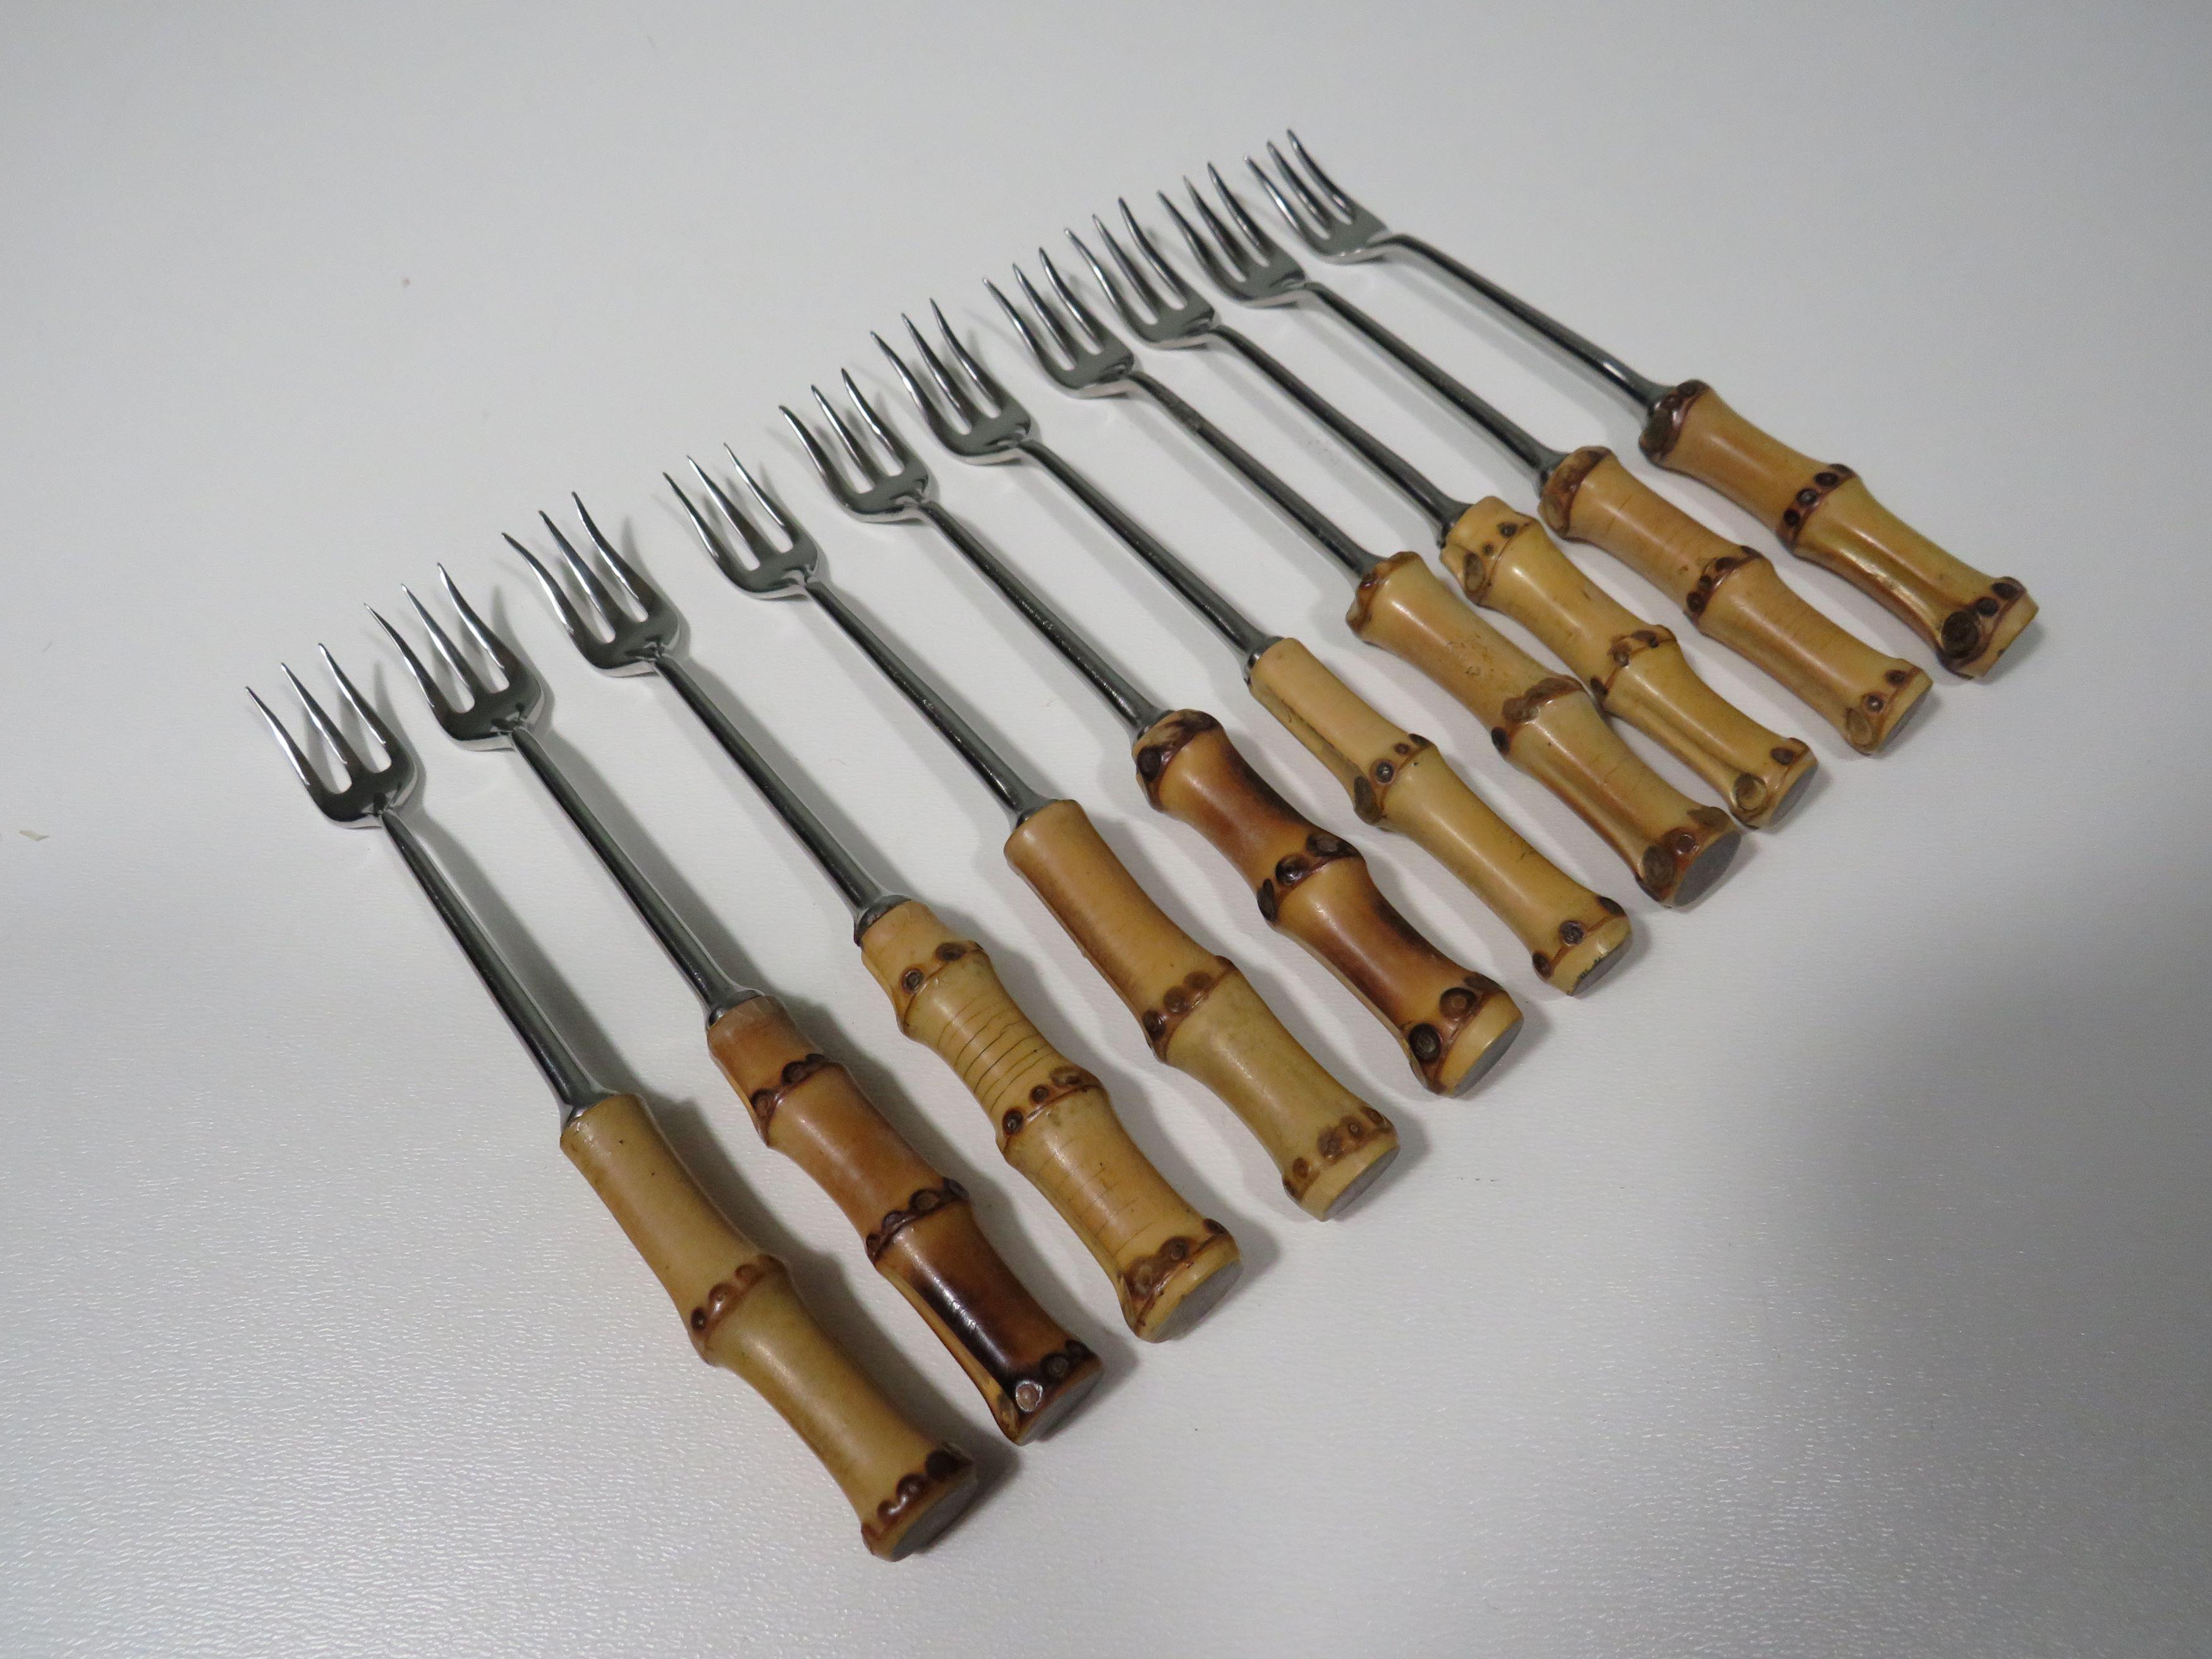 The set of forks has a bamboo handle and the fork itself is made of stainless steel.
The forks are in very nice condition and of very good quality.
They were produced in Germany around the 1950s.
Each fork is 14.7 cm long and 1.5 cm wide.
If there